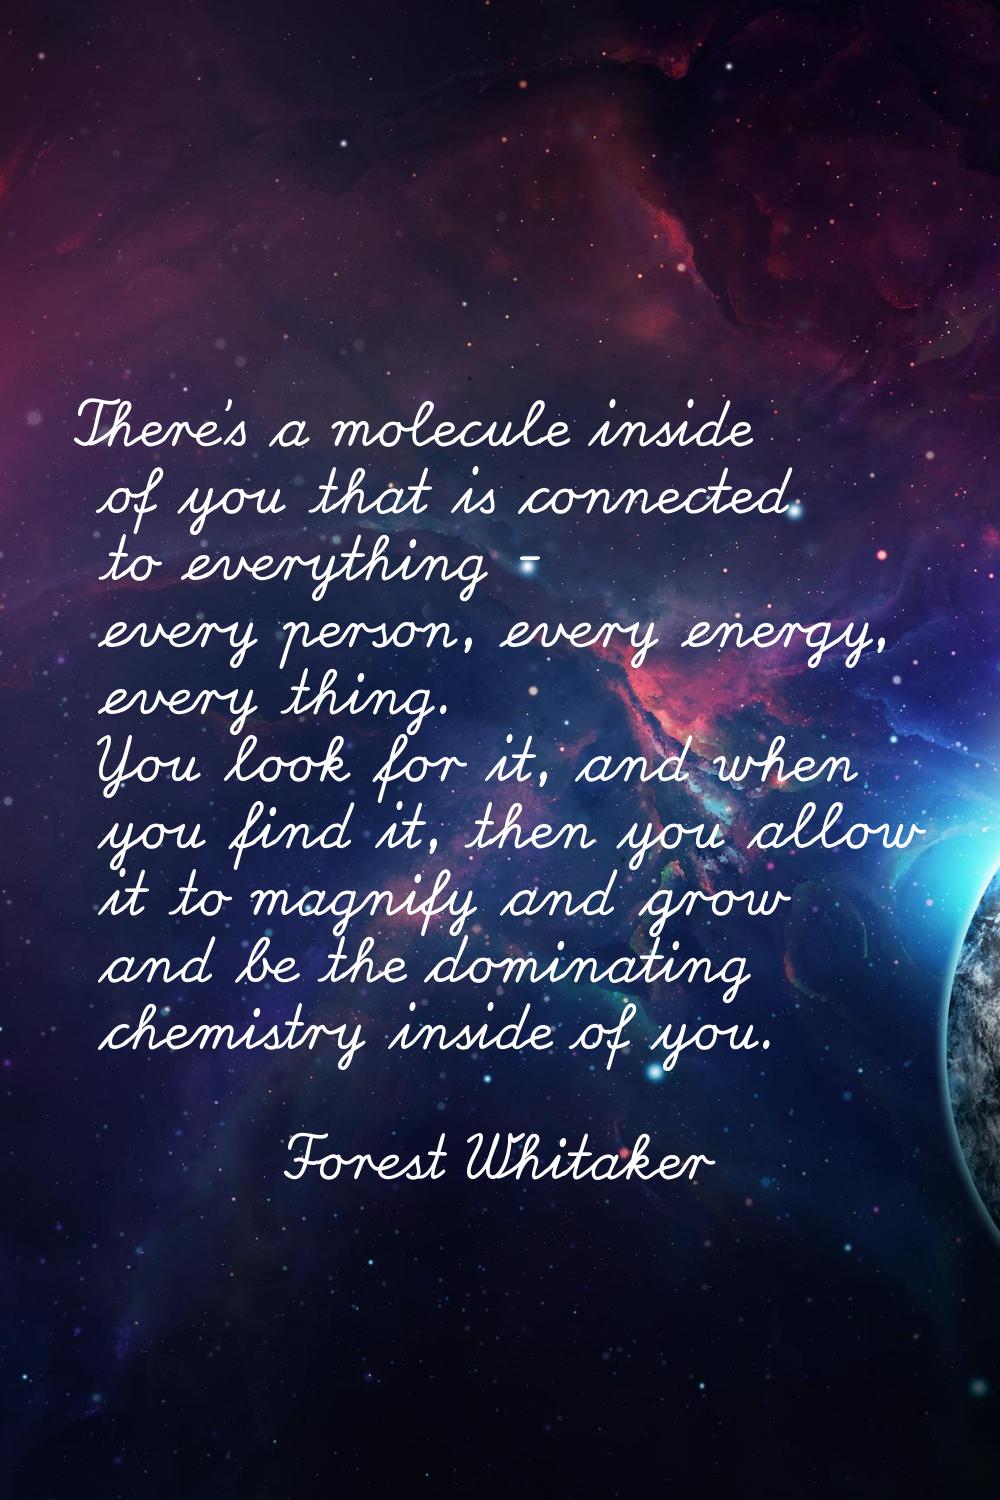 There's a molecule inside of you that is connected to everything - every person, every energy, ever